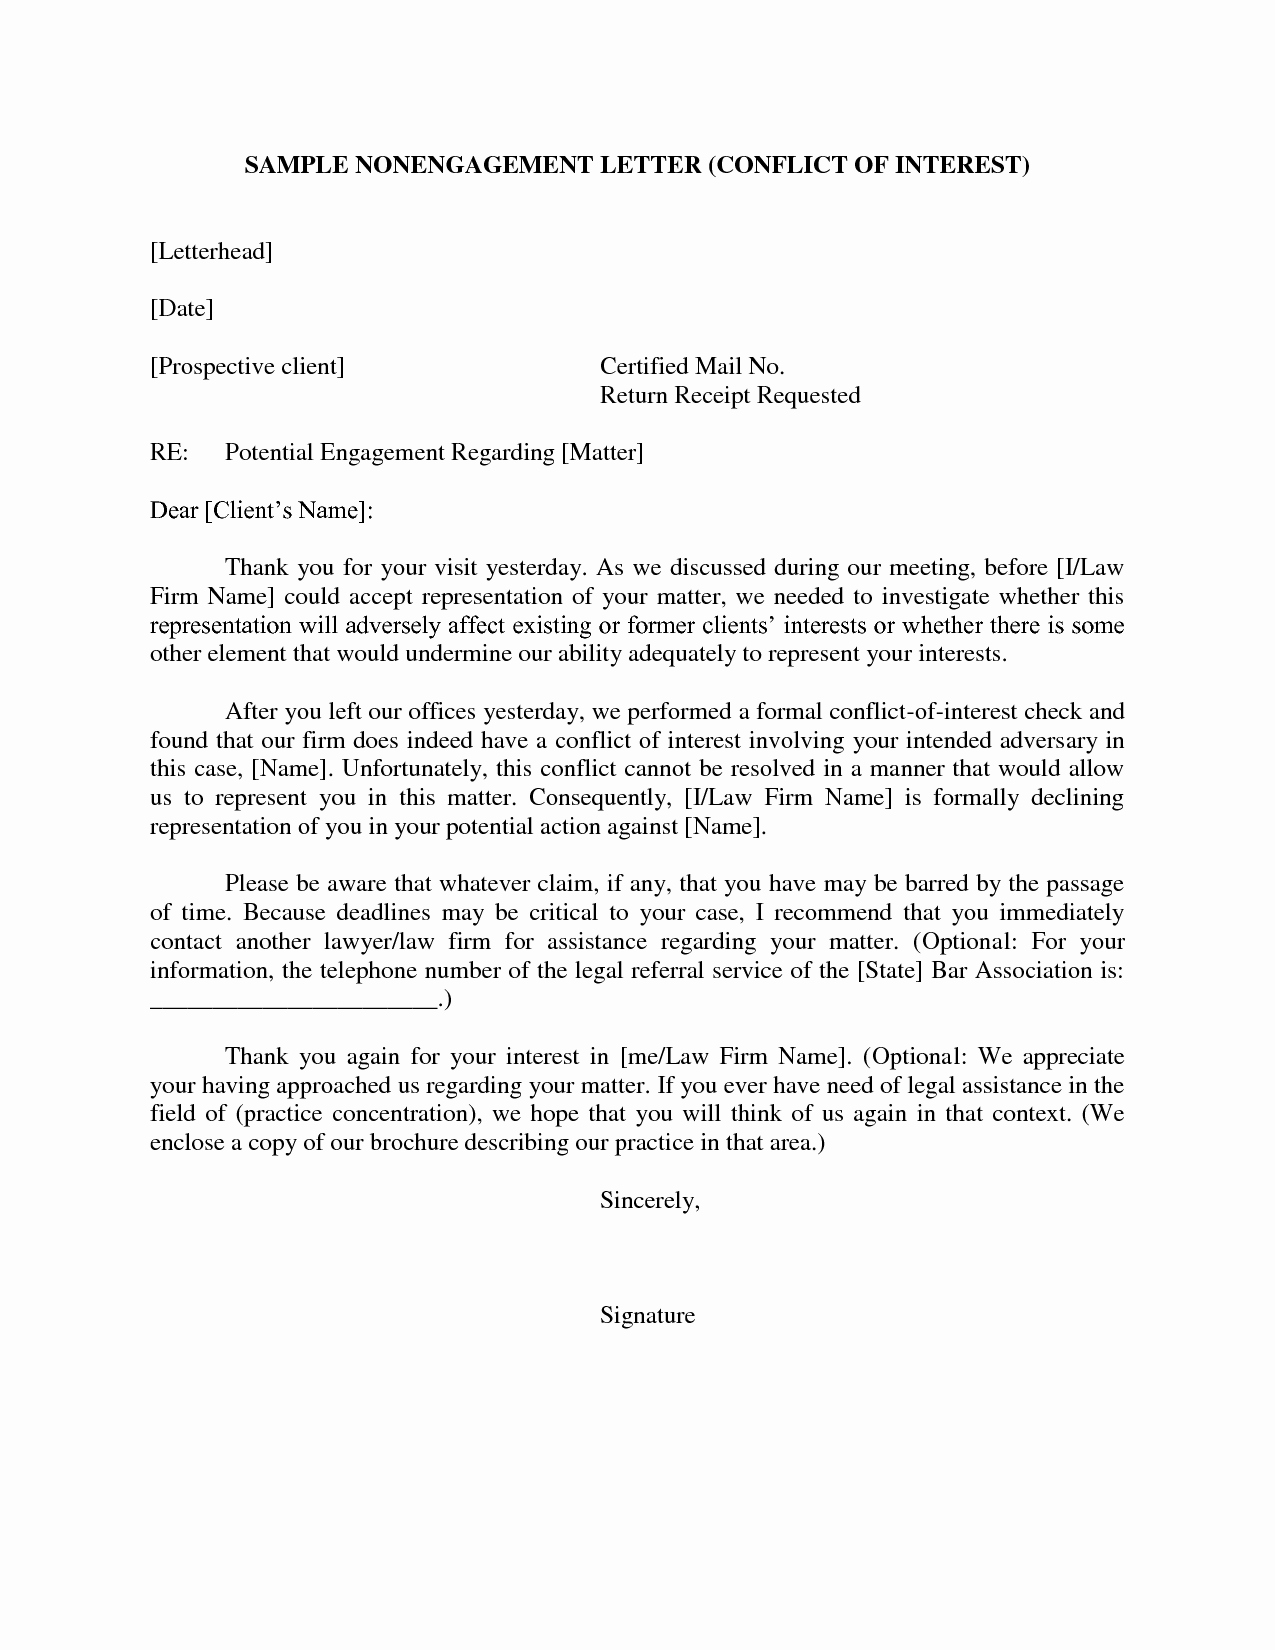 Attorney Client Letter Template Lovely Best S Of Sample Client Letter From attorney Lawyer